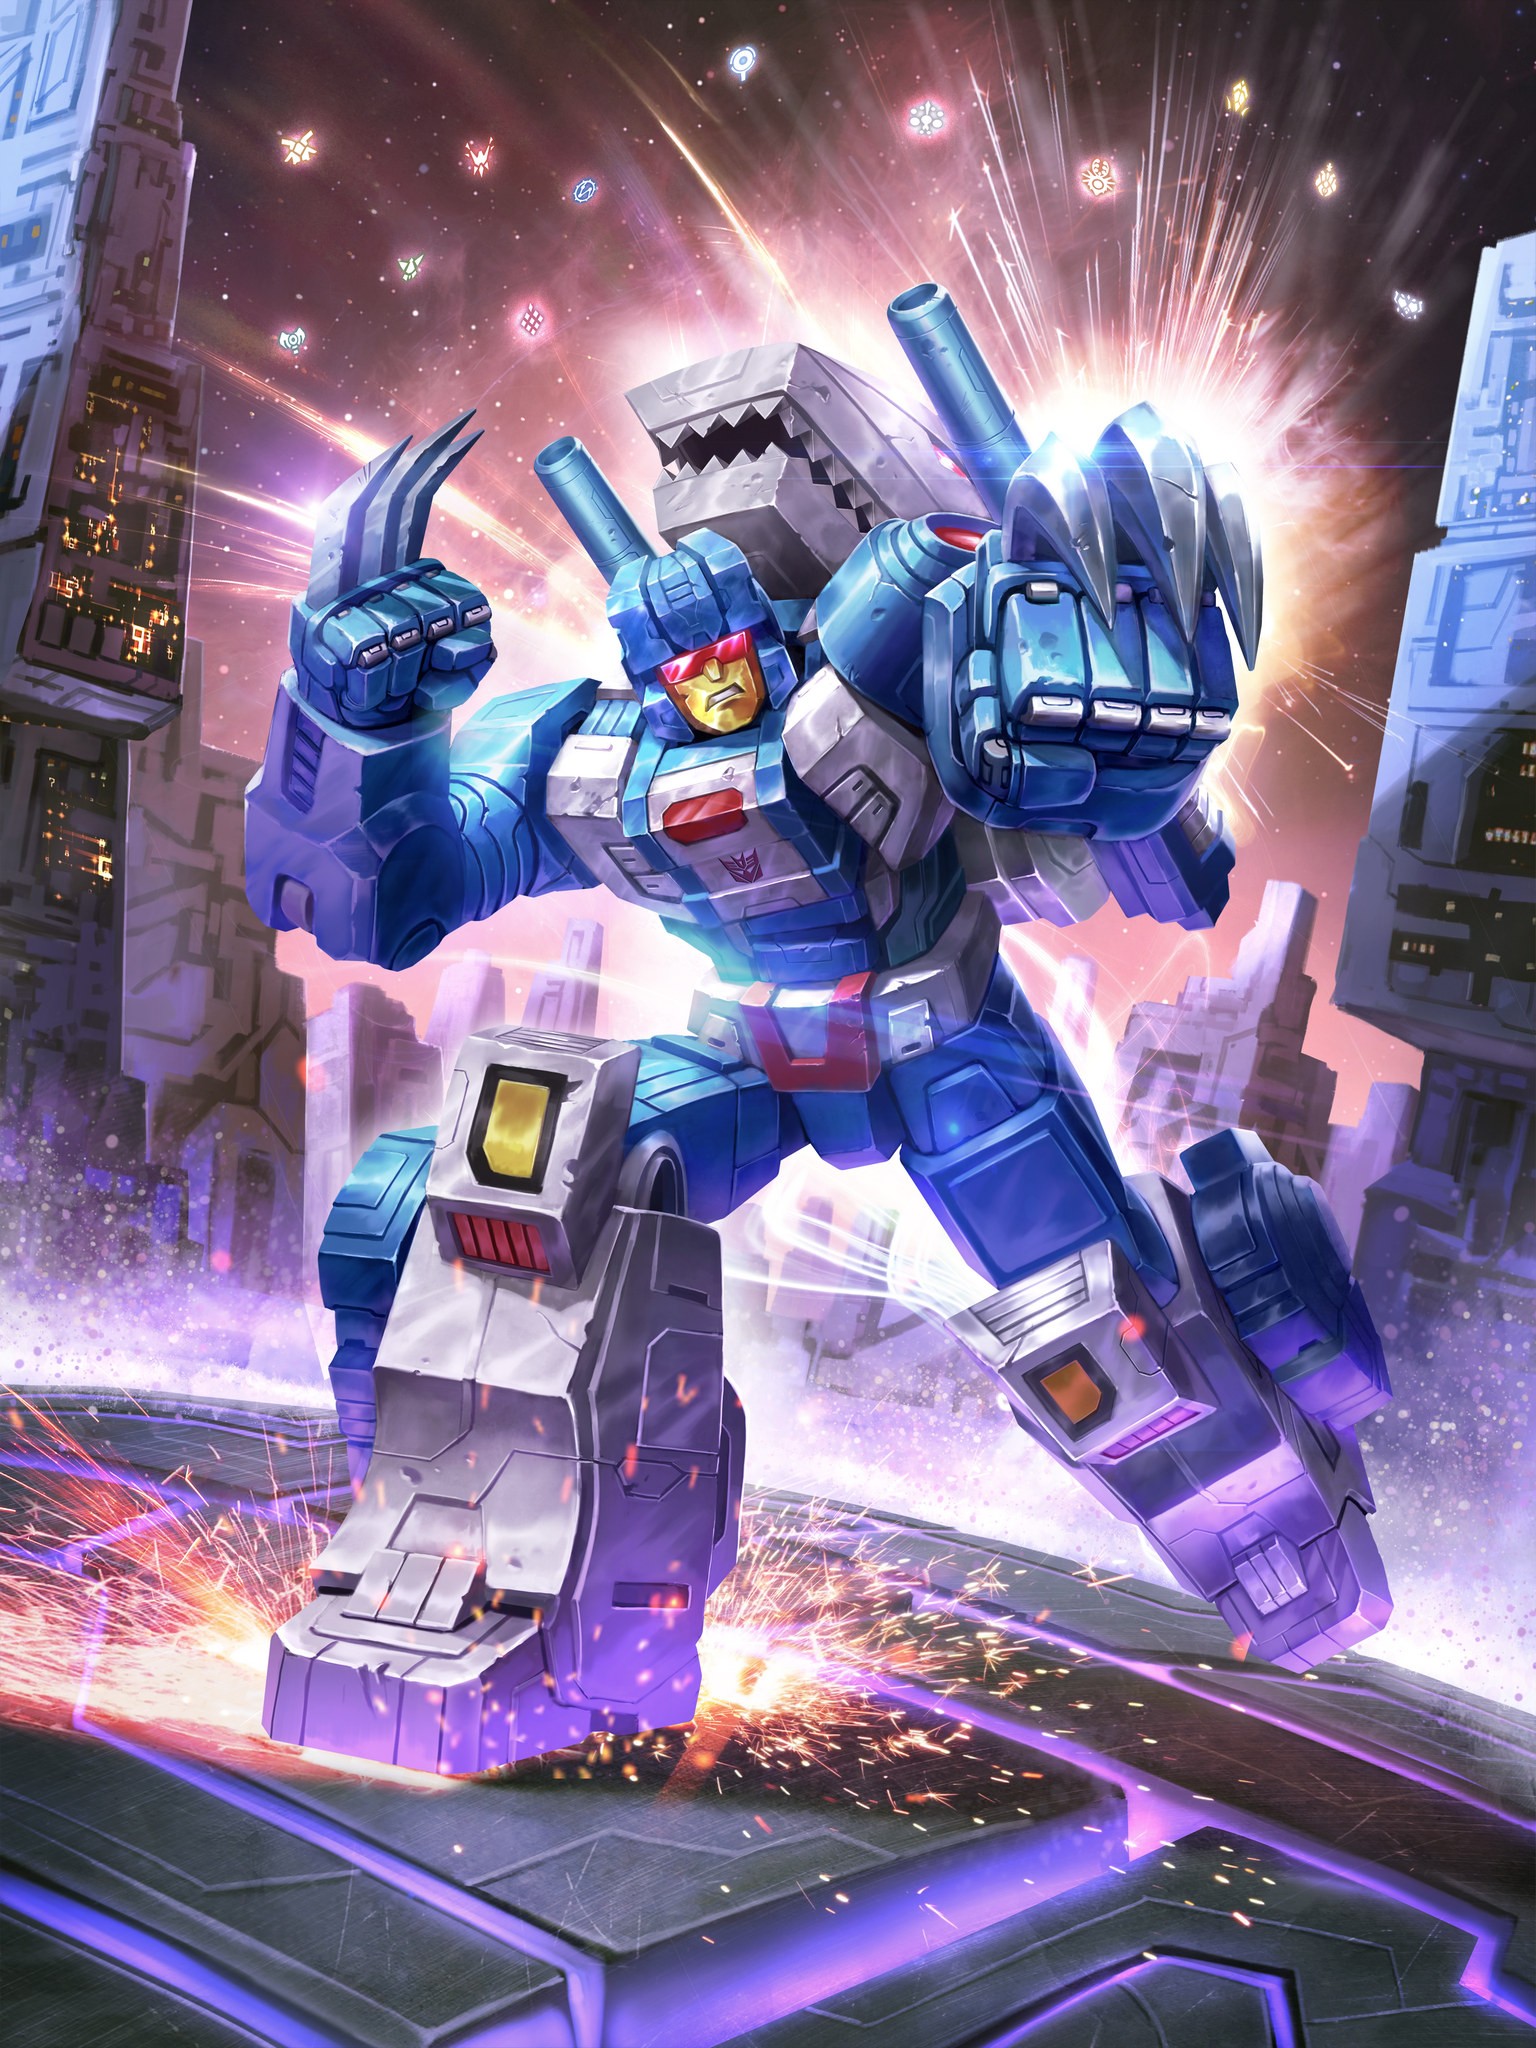 Transformers News: Official Bios and Images for #Transformers Power of the Primes Revealed at NYCC 2017 #hasbronycc